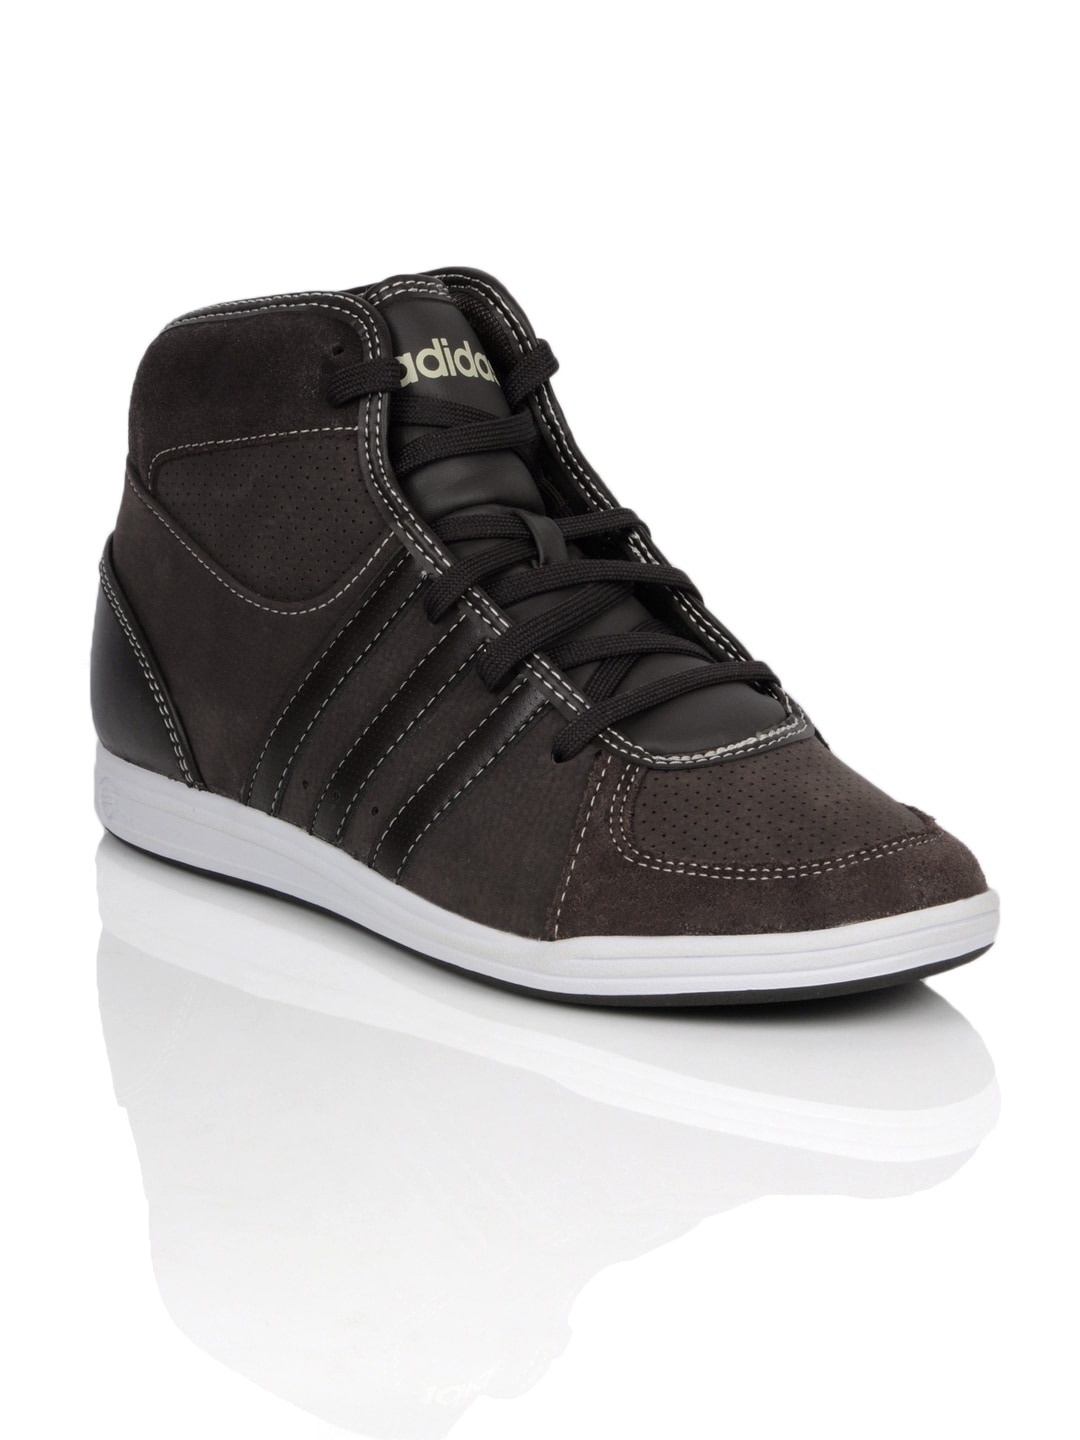 ADIDAS Neo Men Court Sequence Mid Brown Shoes